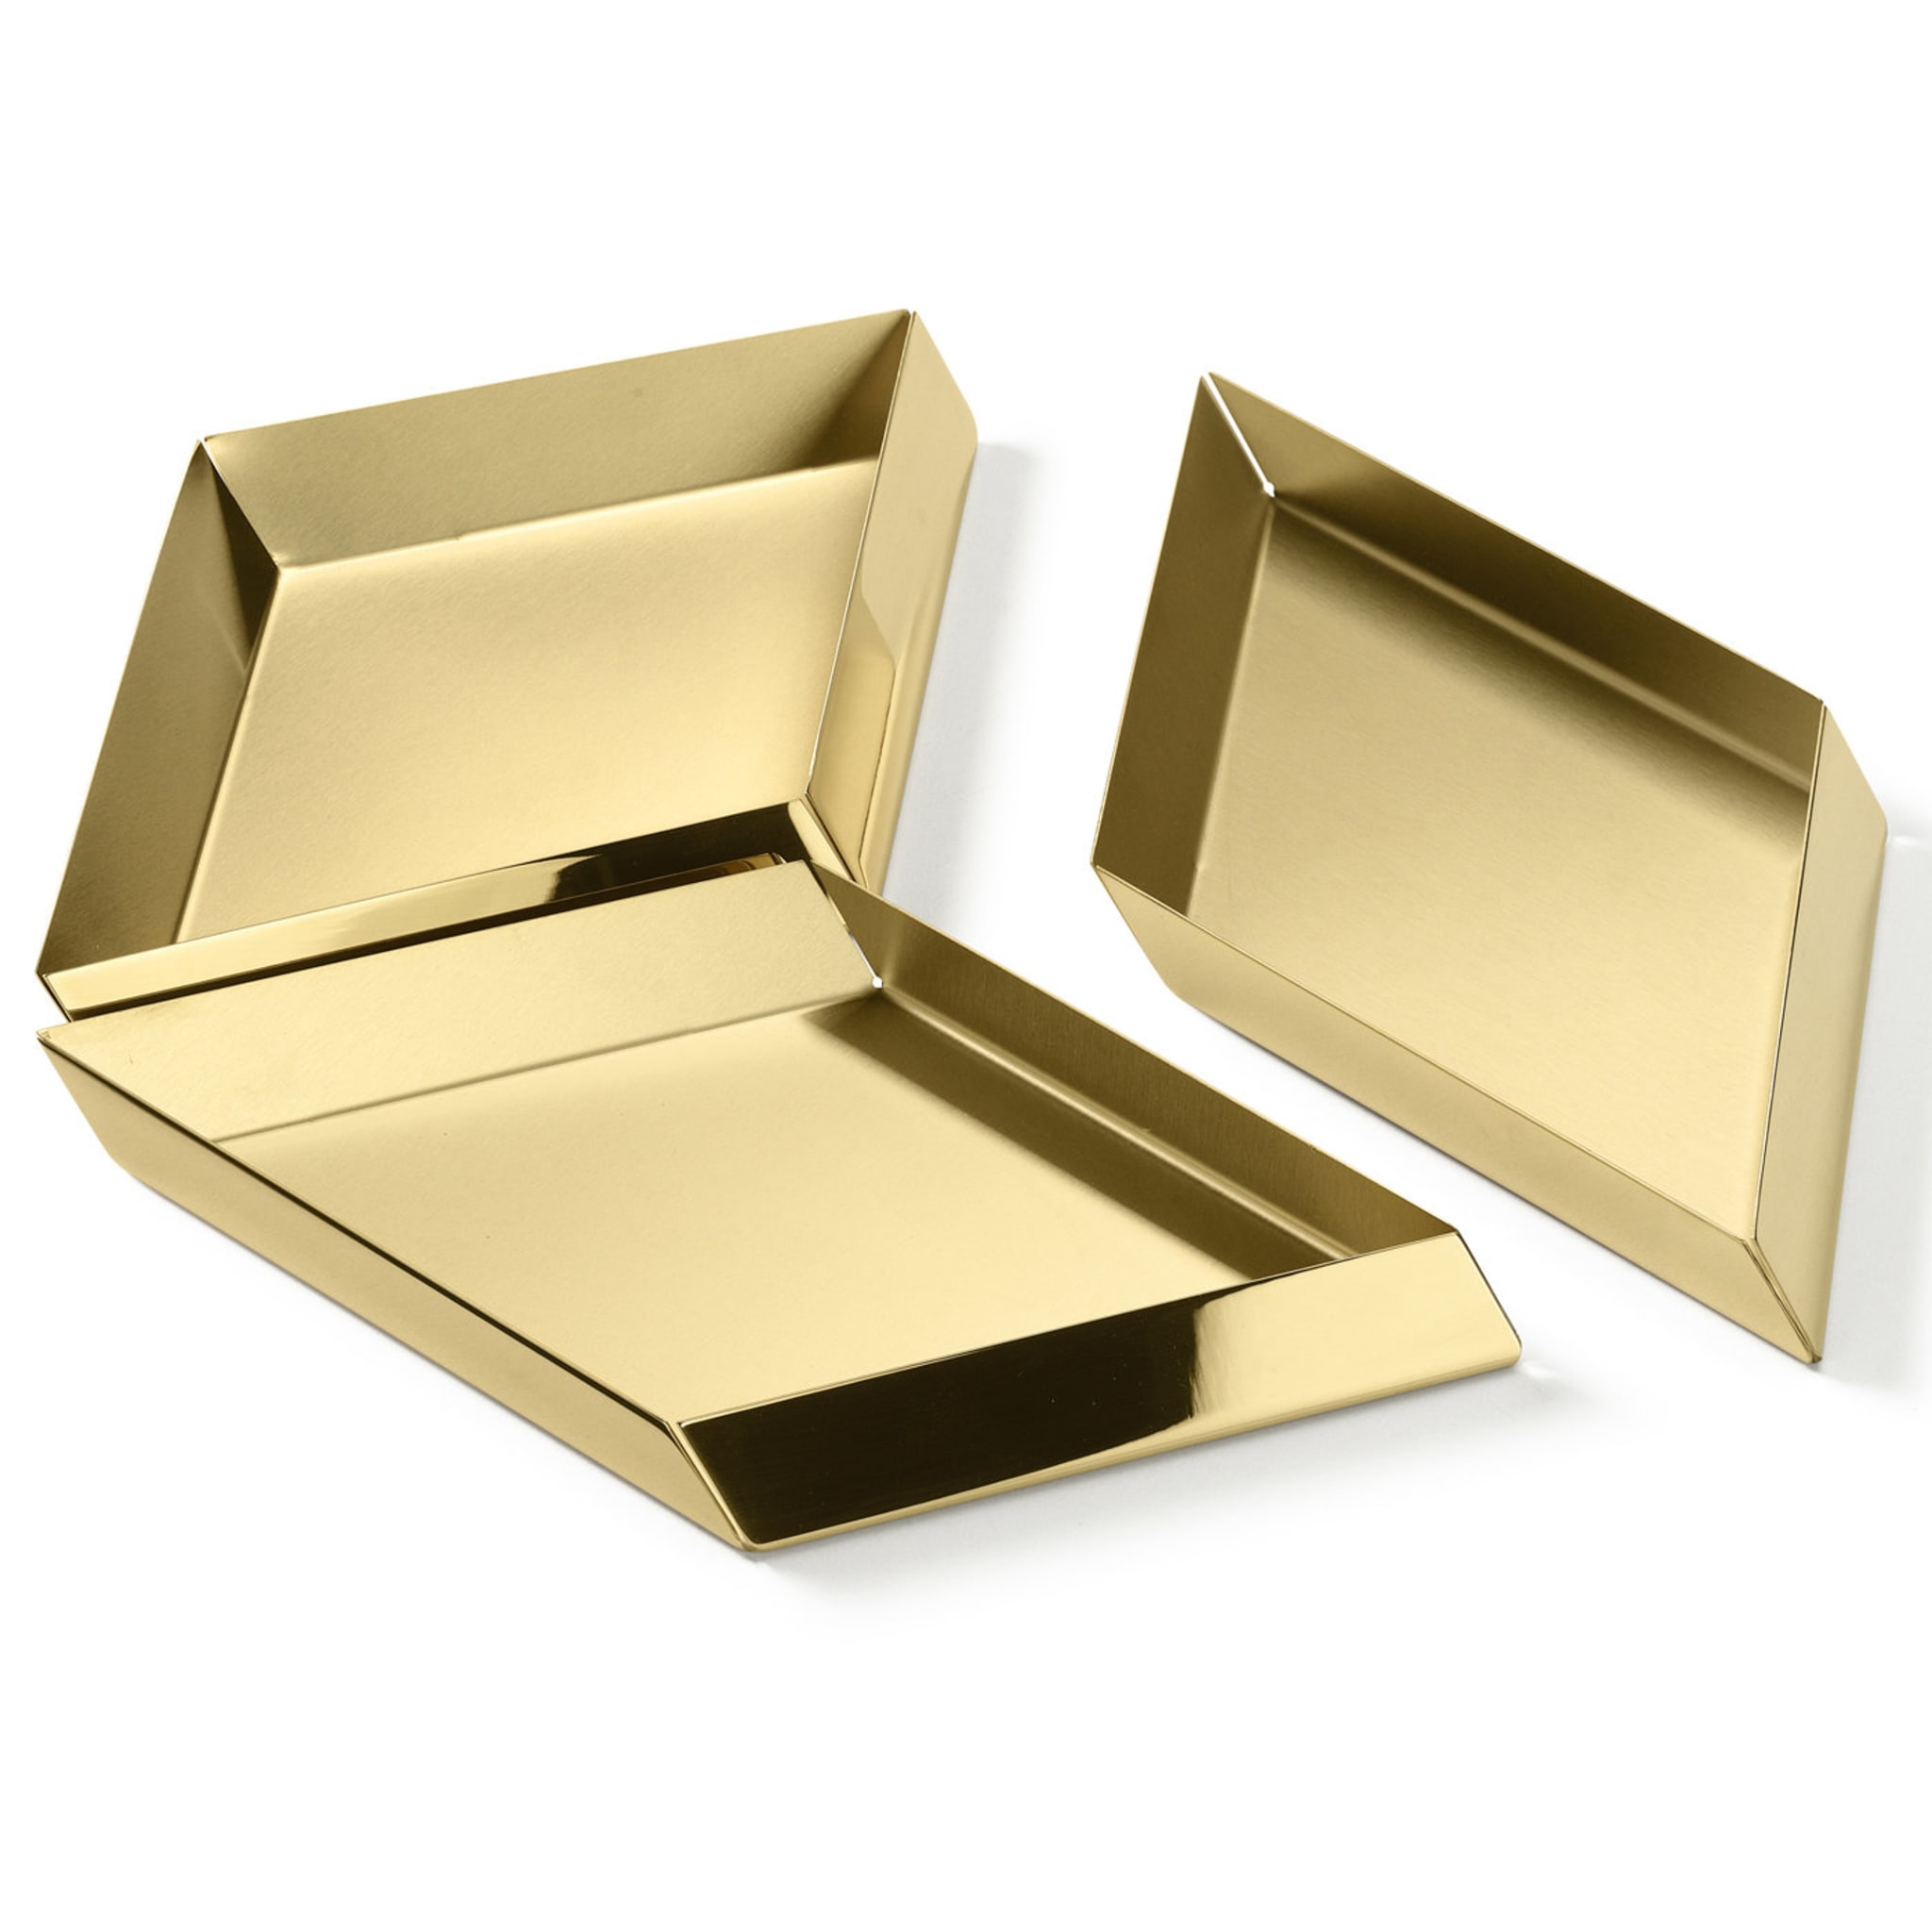 Axonometry Polished Brass Large Cube Tray By Elisa Giovannoni  - Alternative view 1